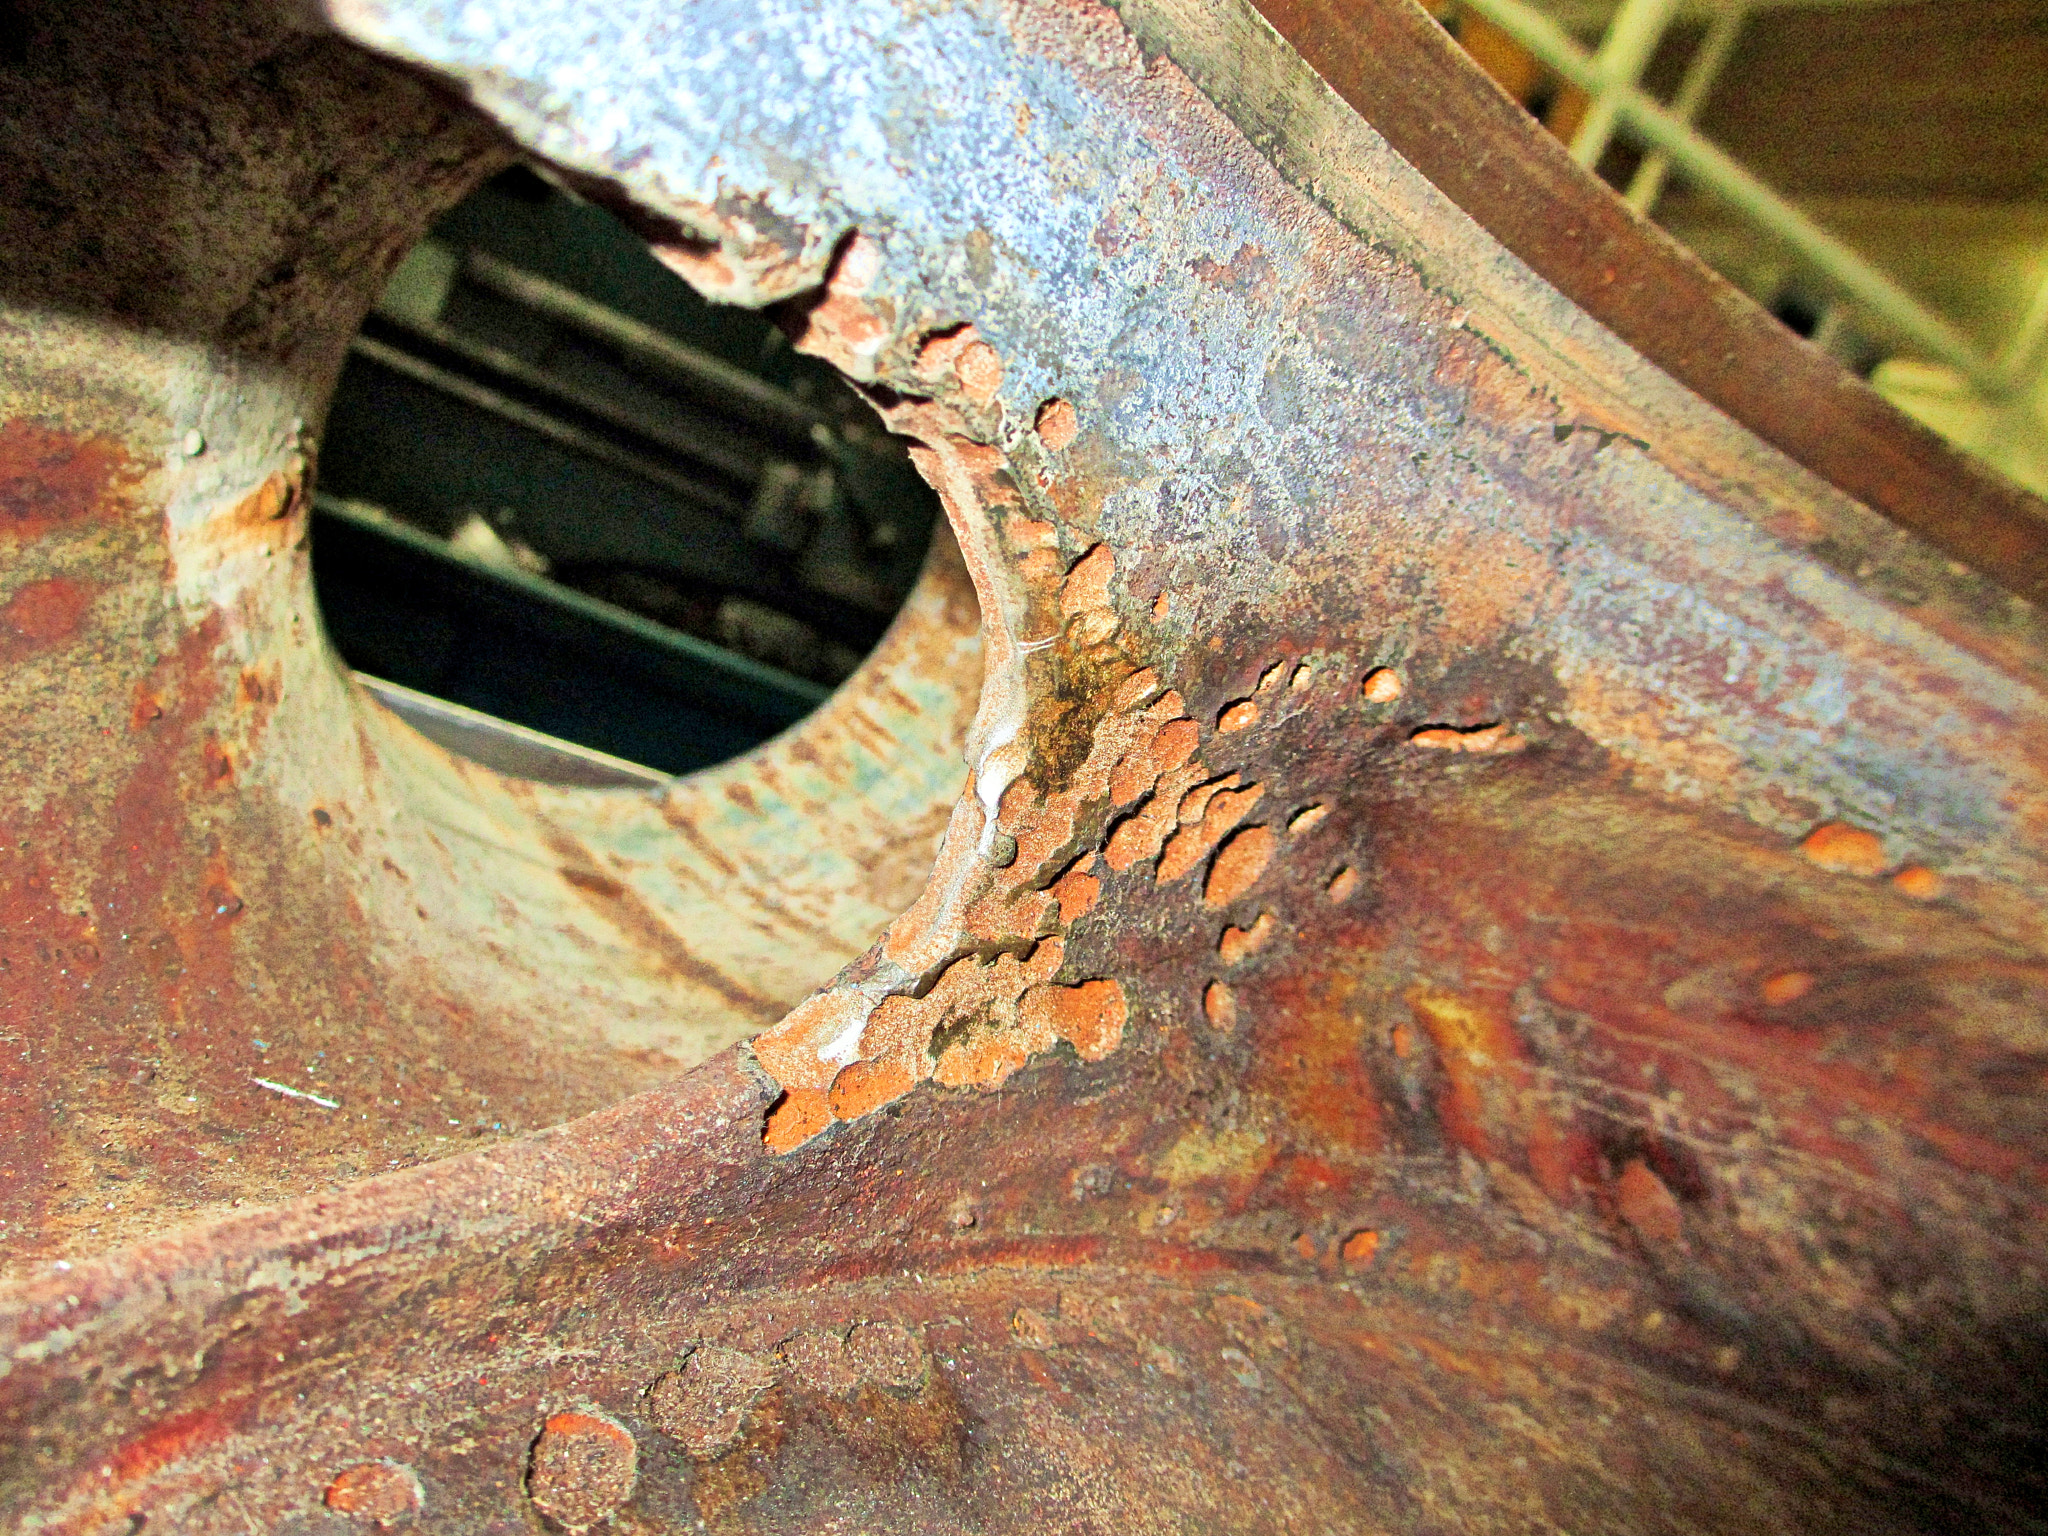 Canon PowerShot ELPH 310 HS (IXUS 230 HS / IXY 600F) sample photo. Pitting corrosion of a pump casing. photography